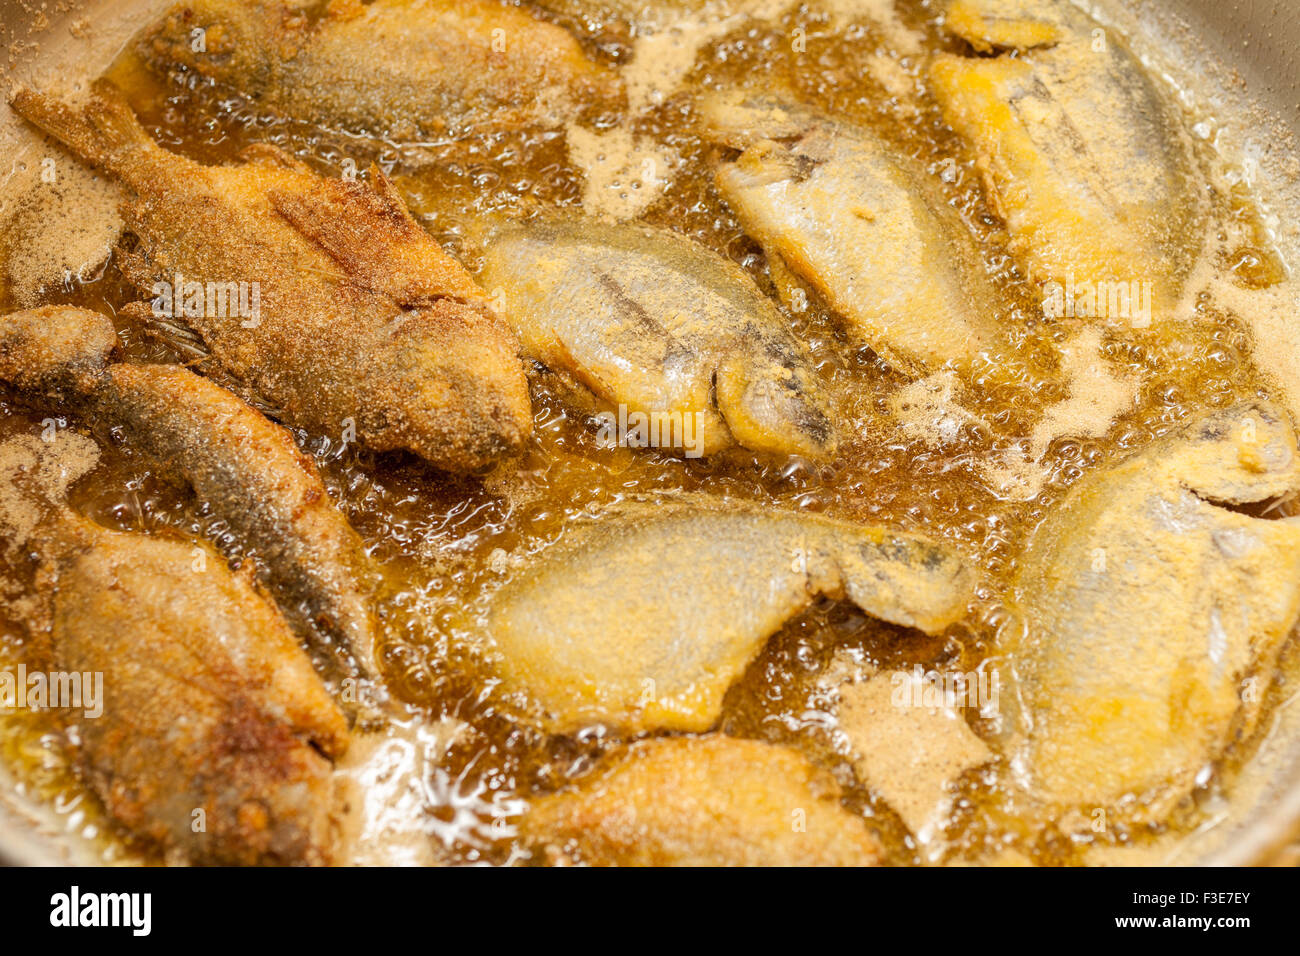 Small fishes of the Greek sea roasted in the frying pan Stock Photo